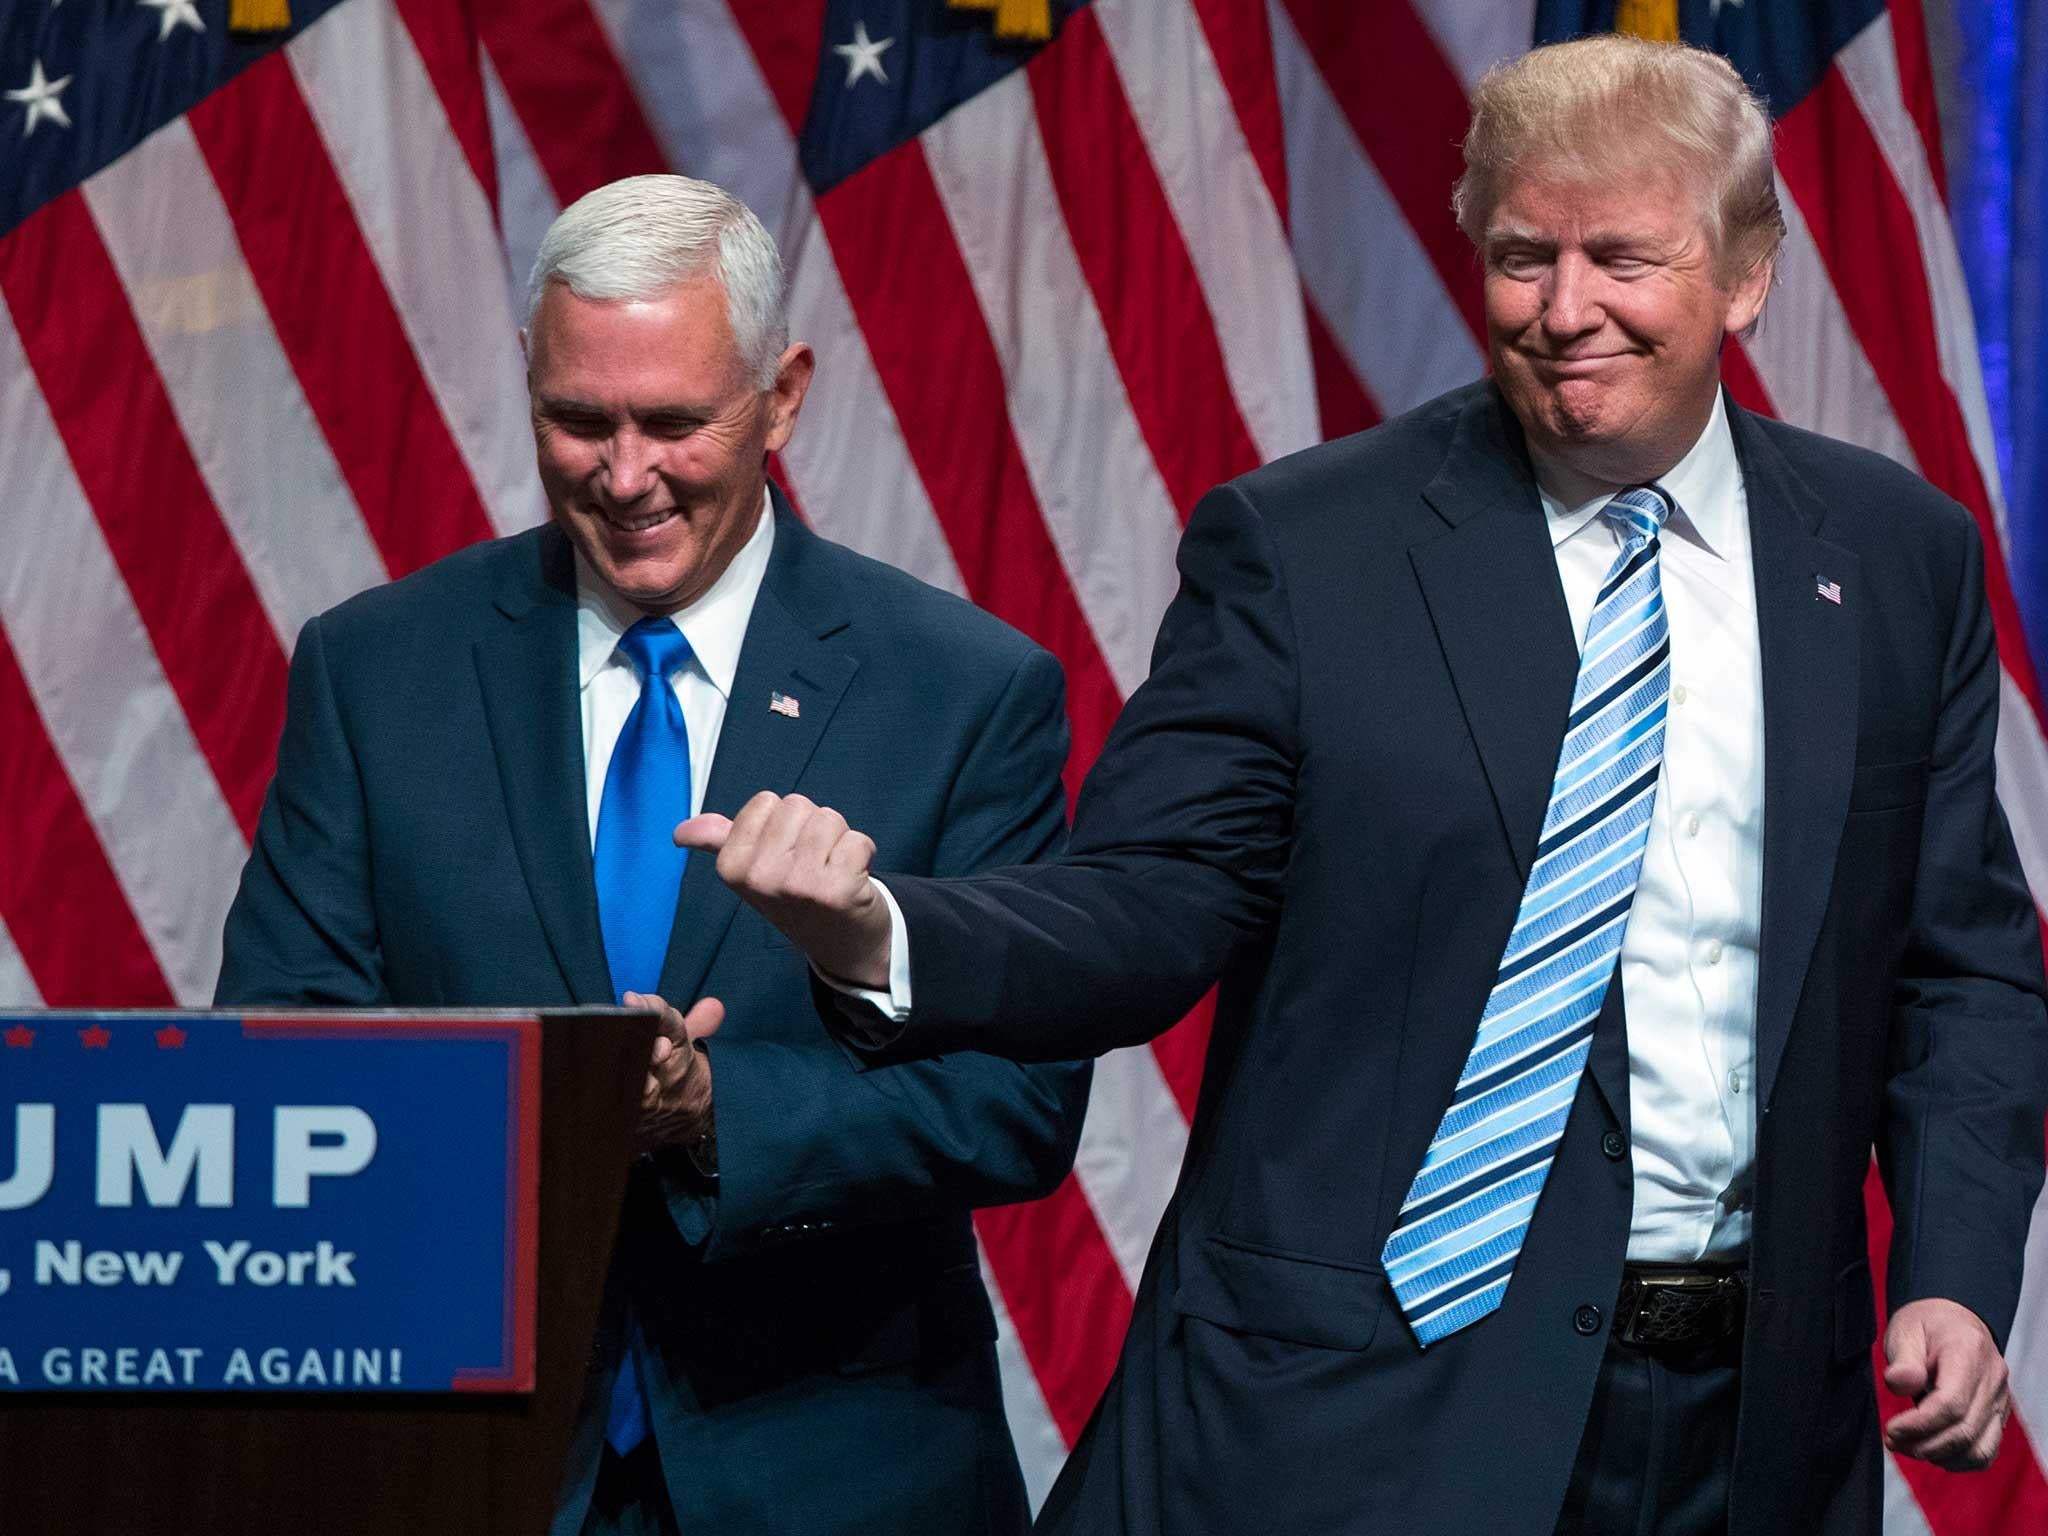 Donald Trump has chosen Mike Pence as his vice-presidential candidate